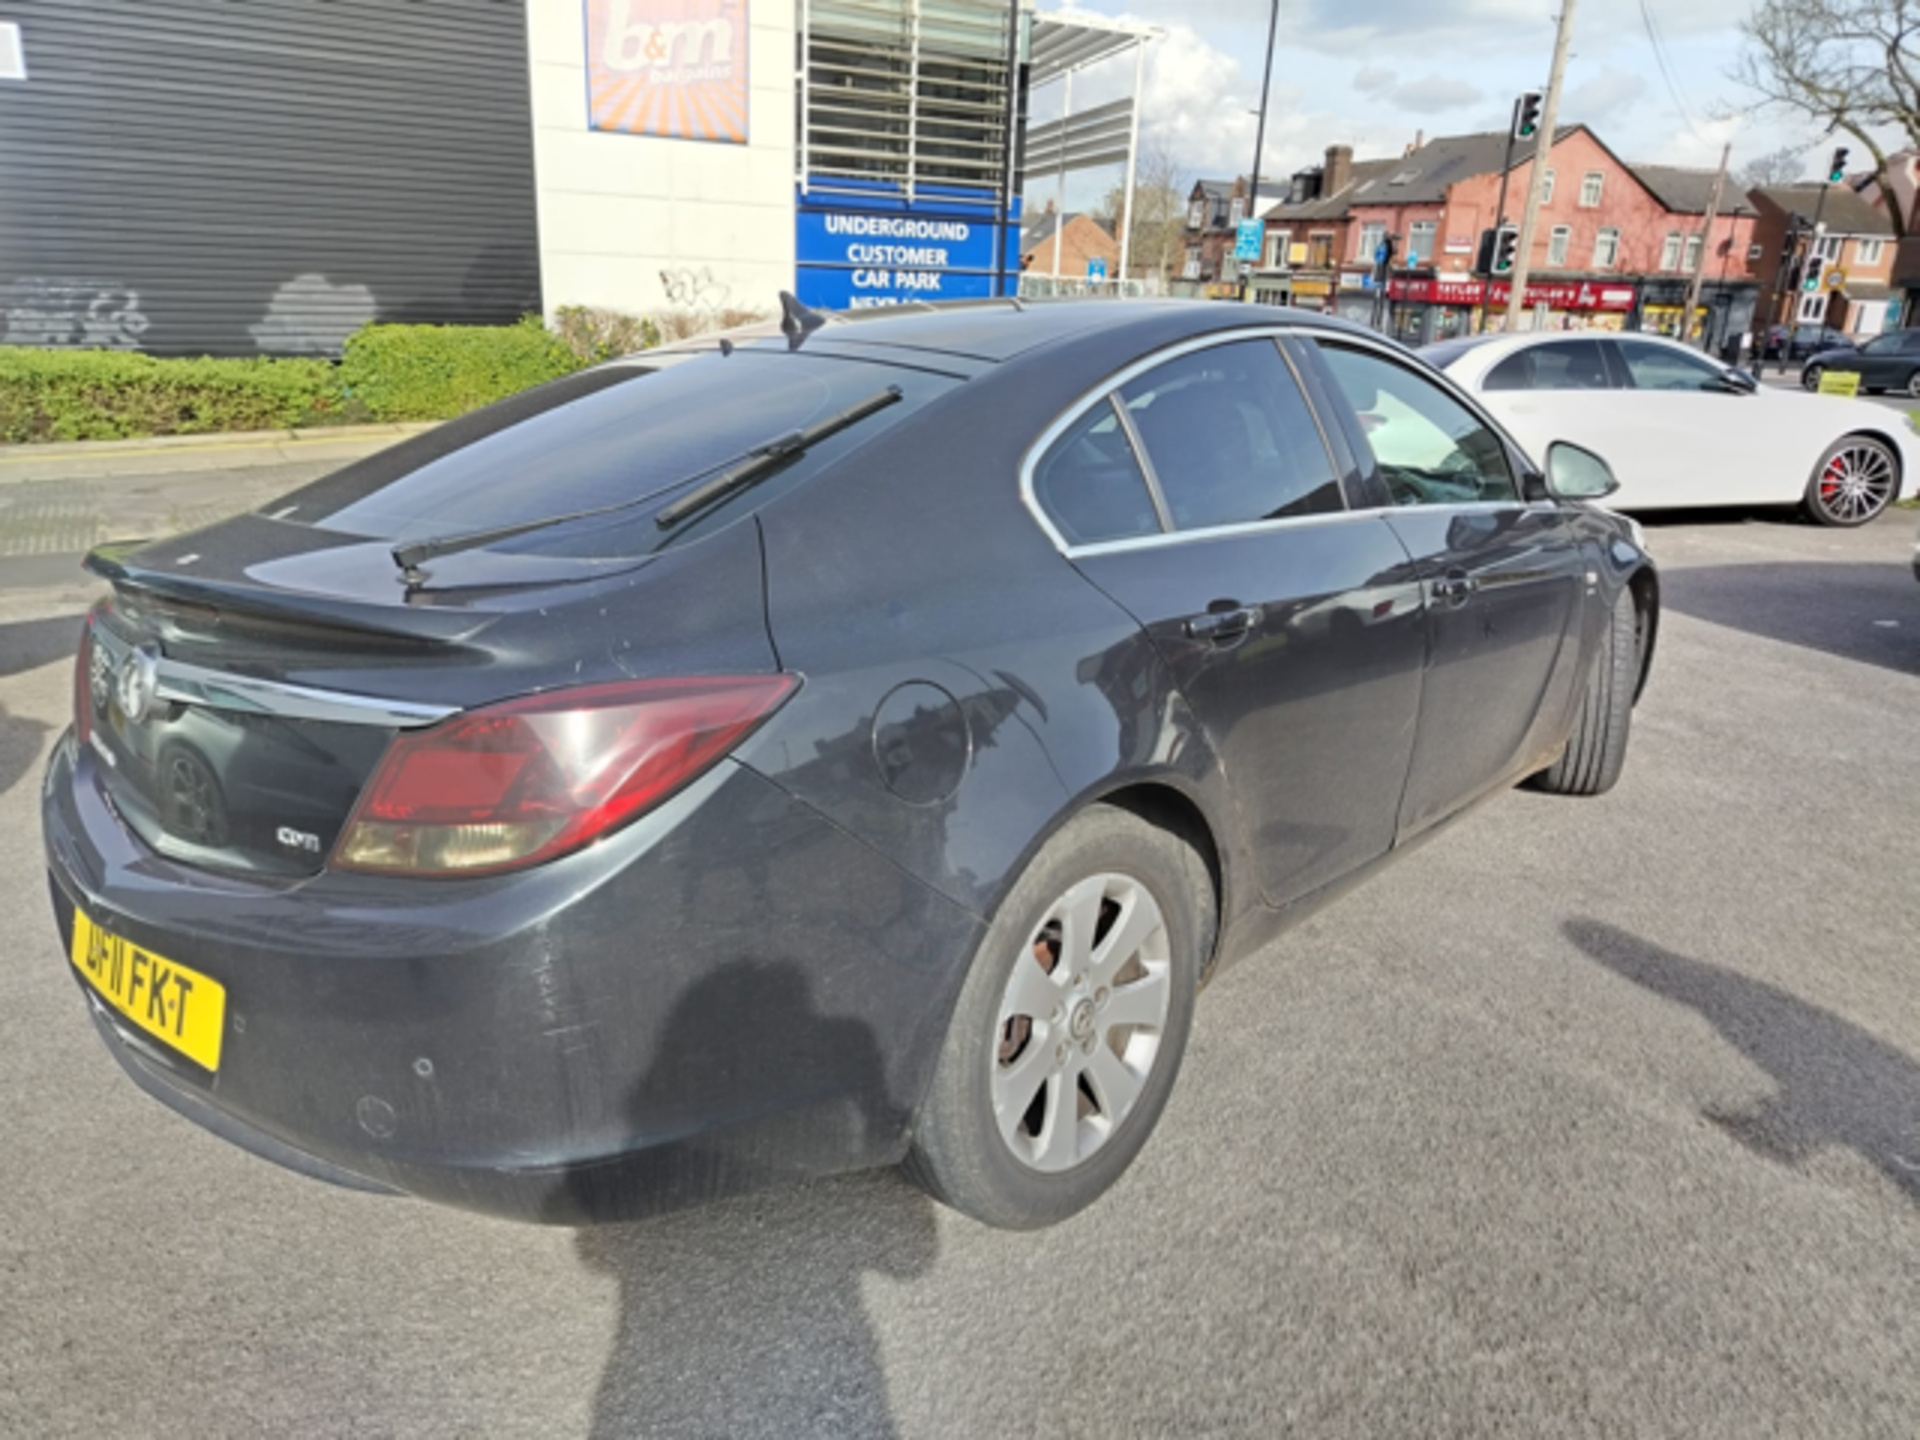 VAUXHALL INSIGNIA DF11 FKT - Image 4 of 11